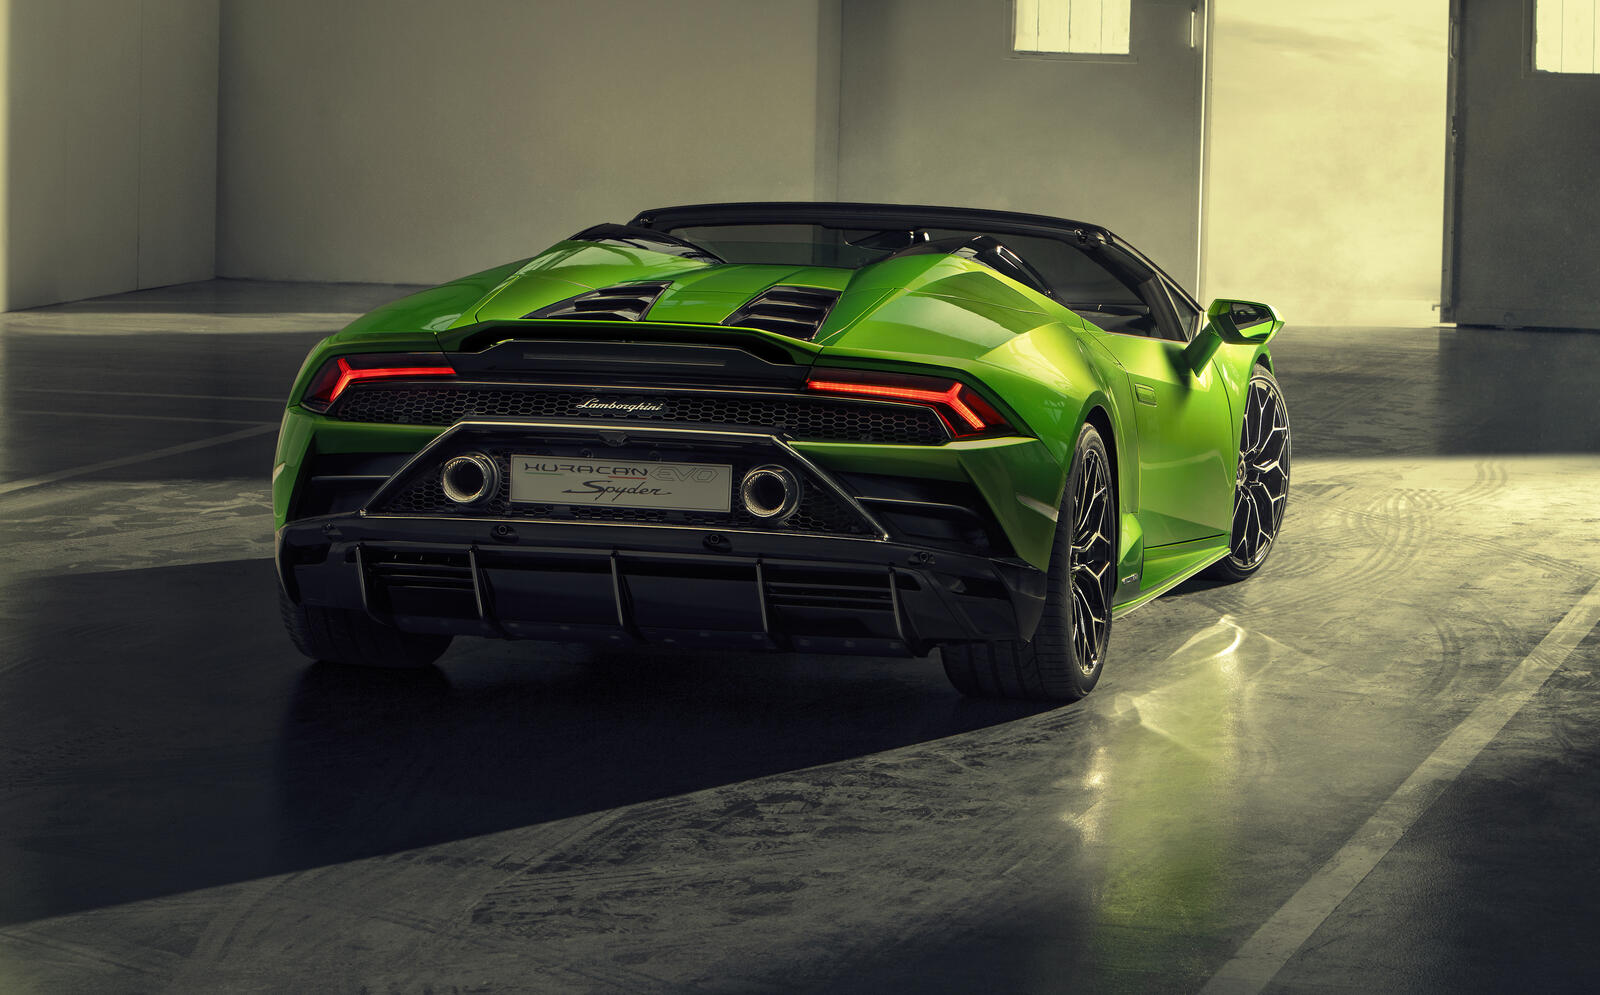 Free photo Lamborghini Huracan Evo Spyder in light green convertible body photographed from behind